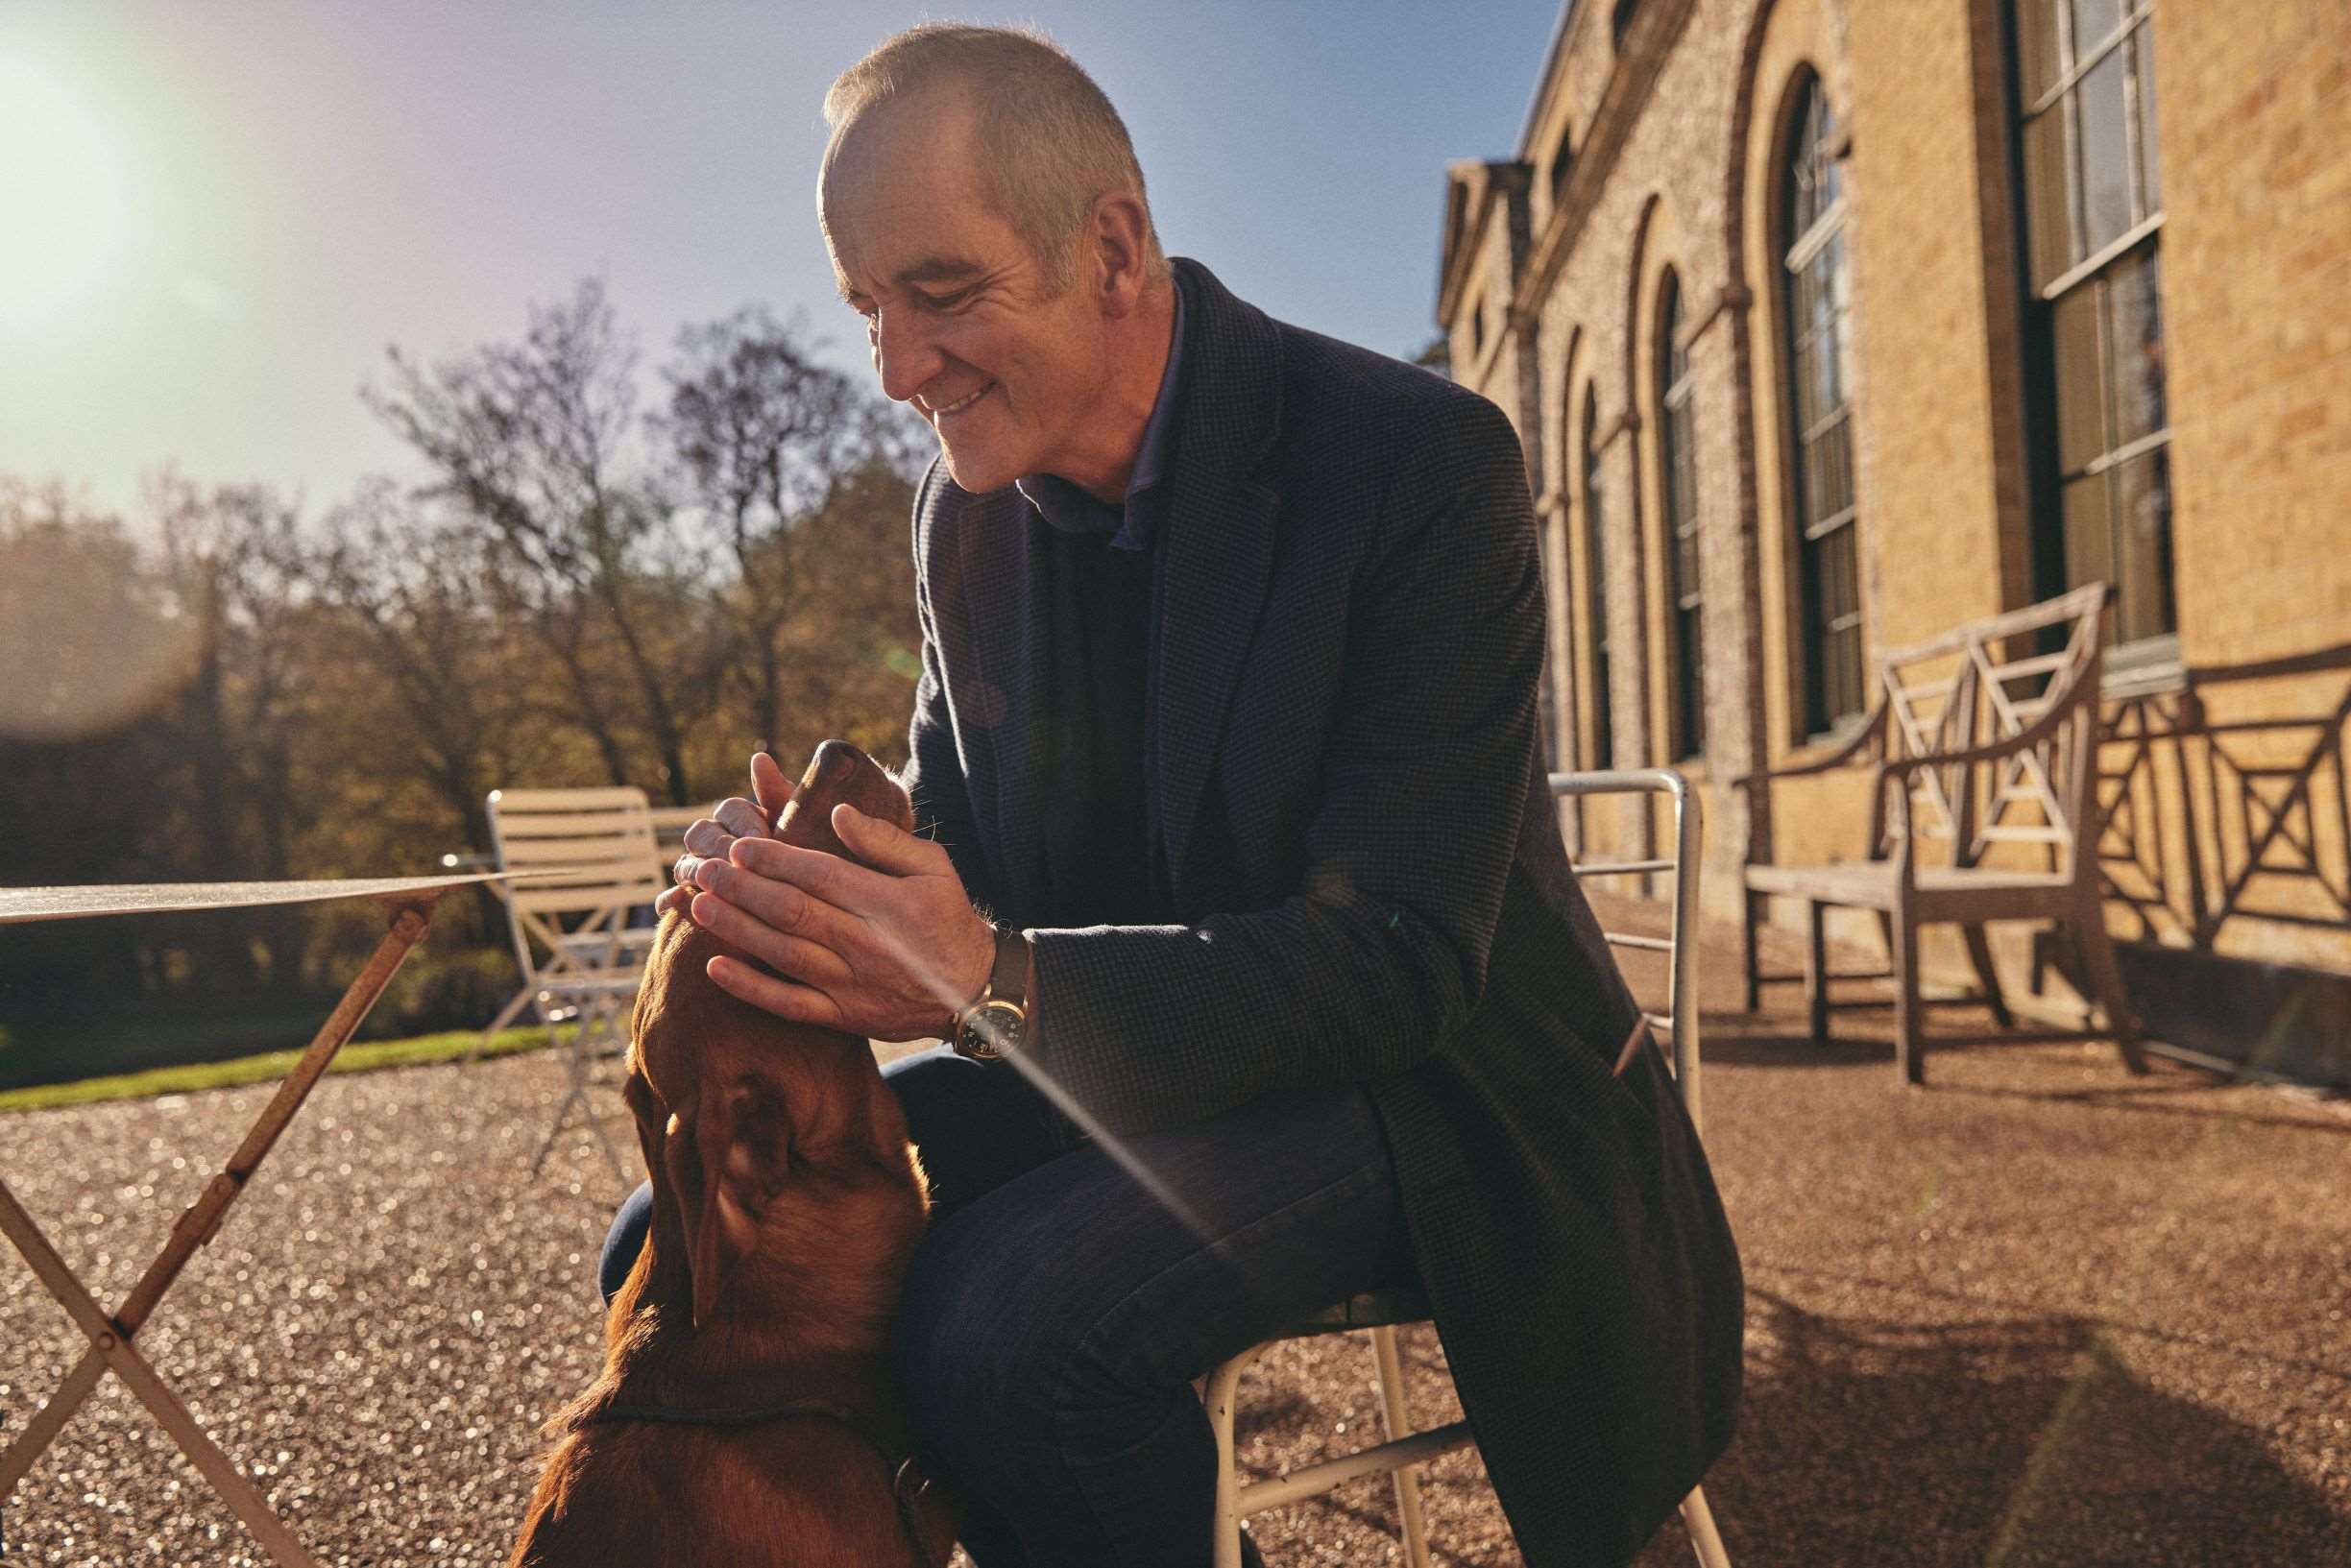 kevin-mccloud-with-dog-goodwoof.jpg